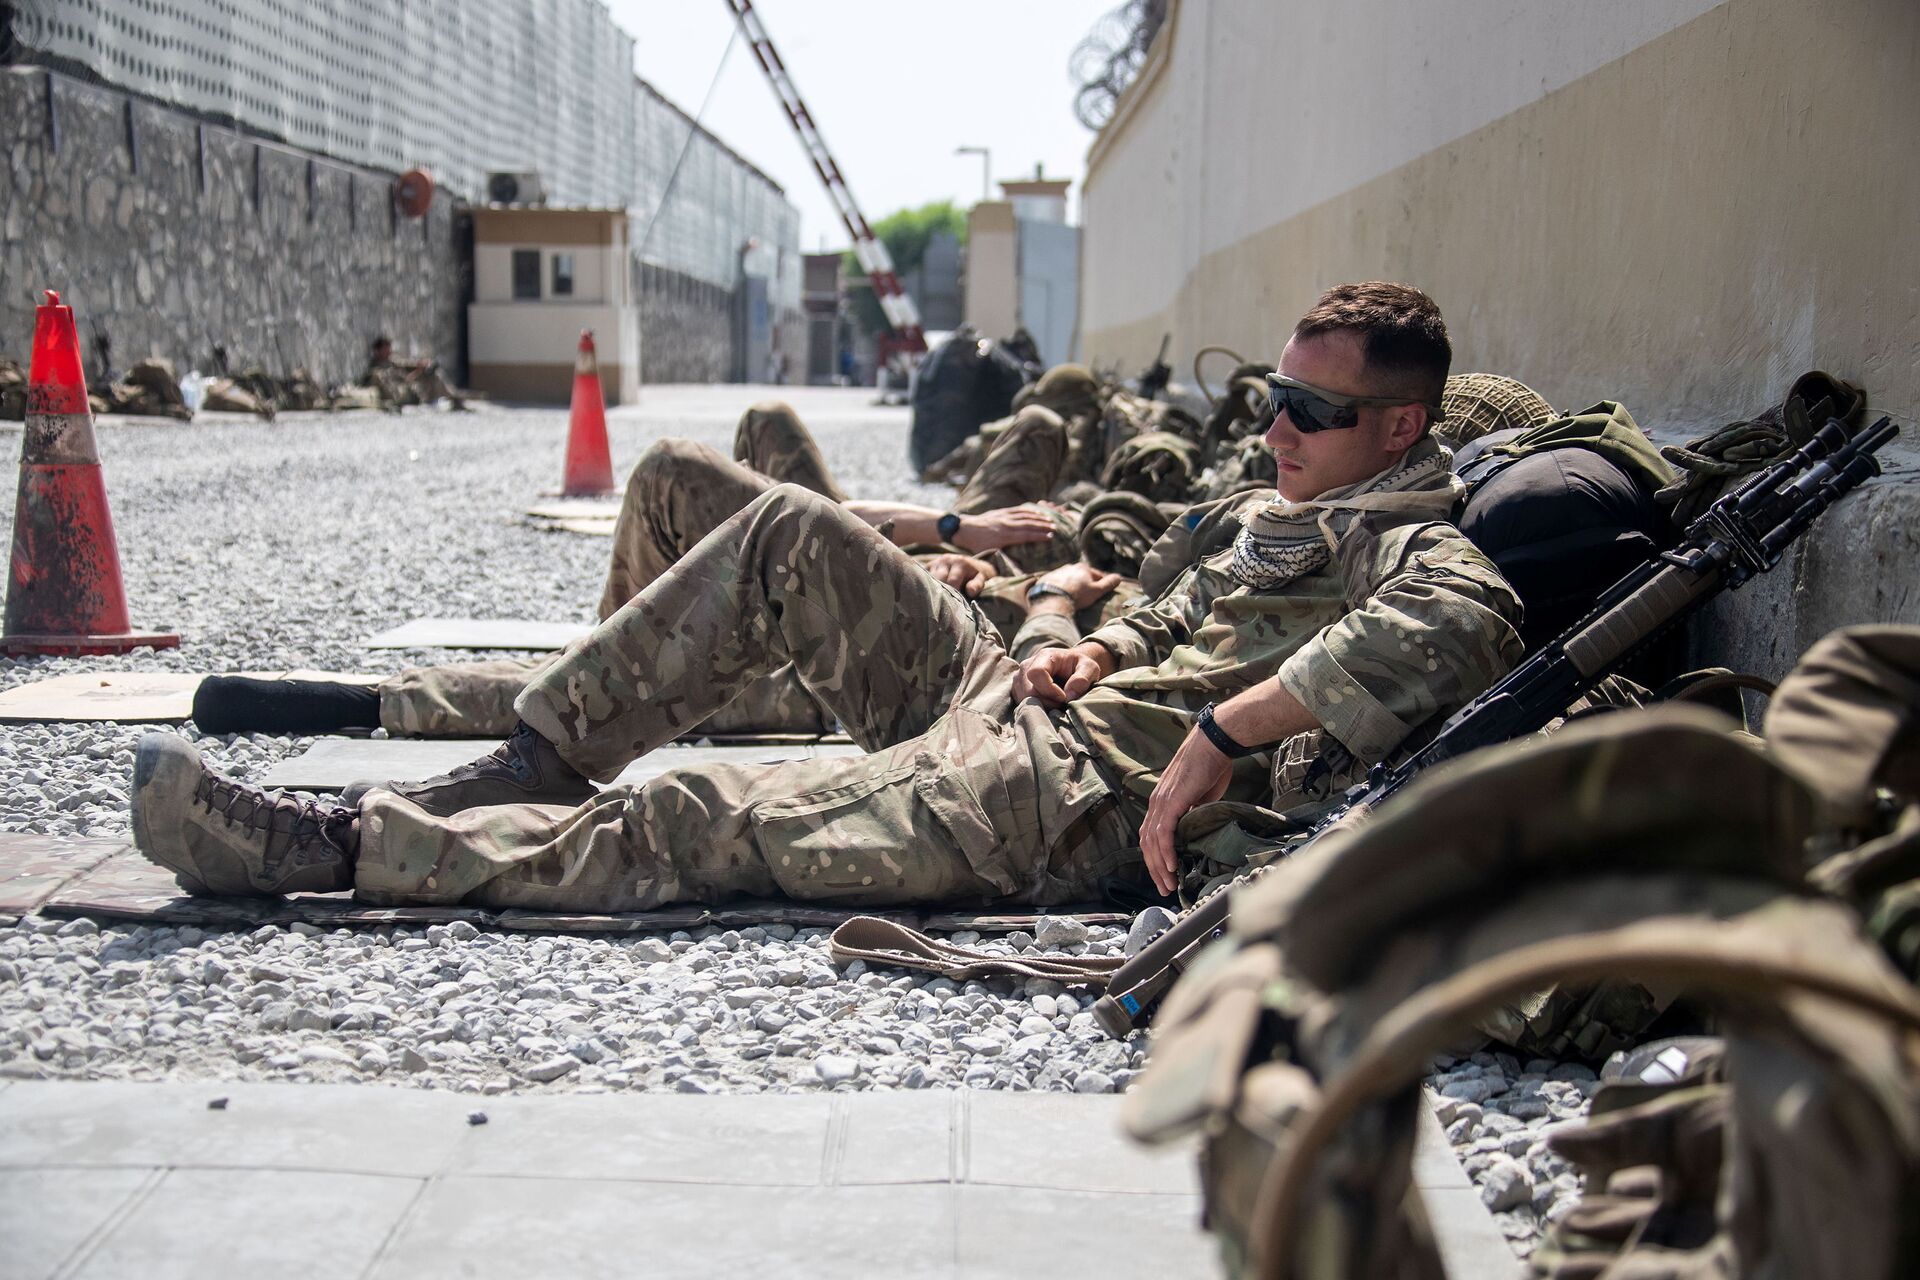 Members of the UK Armed Forces rest as they continue to take part in the evacuation of entitled personnel from Kabul airport, in Kabul, Afghanistan August 19-22, 2021, in this handout picture obtained by Reuters on August 23, 2021 - Sputnik International, 1920, 21.09.2021